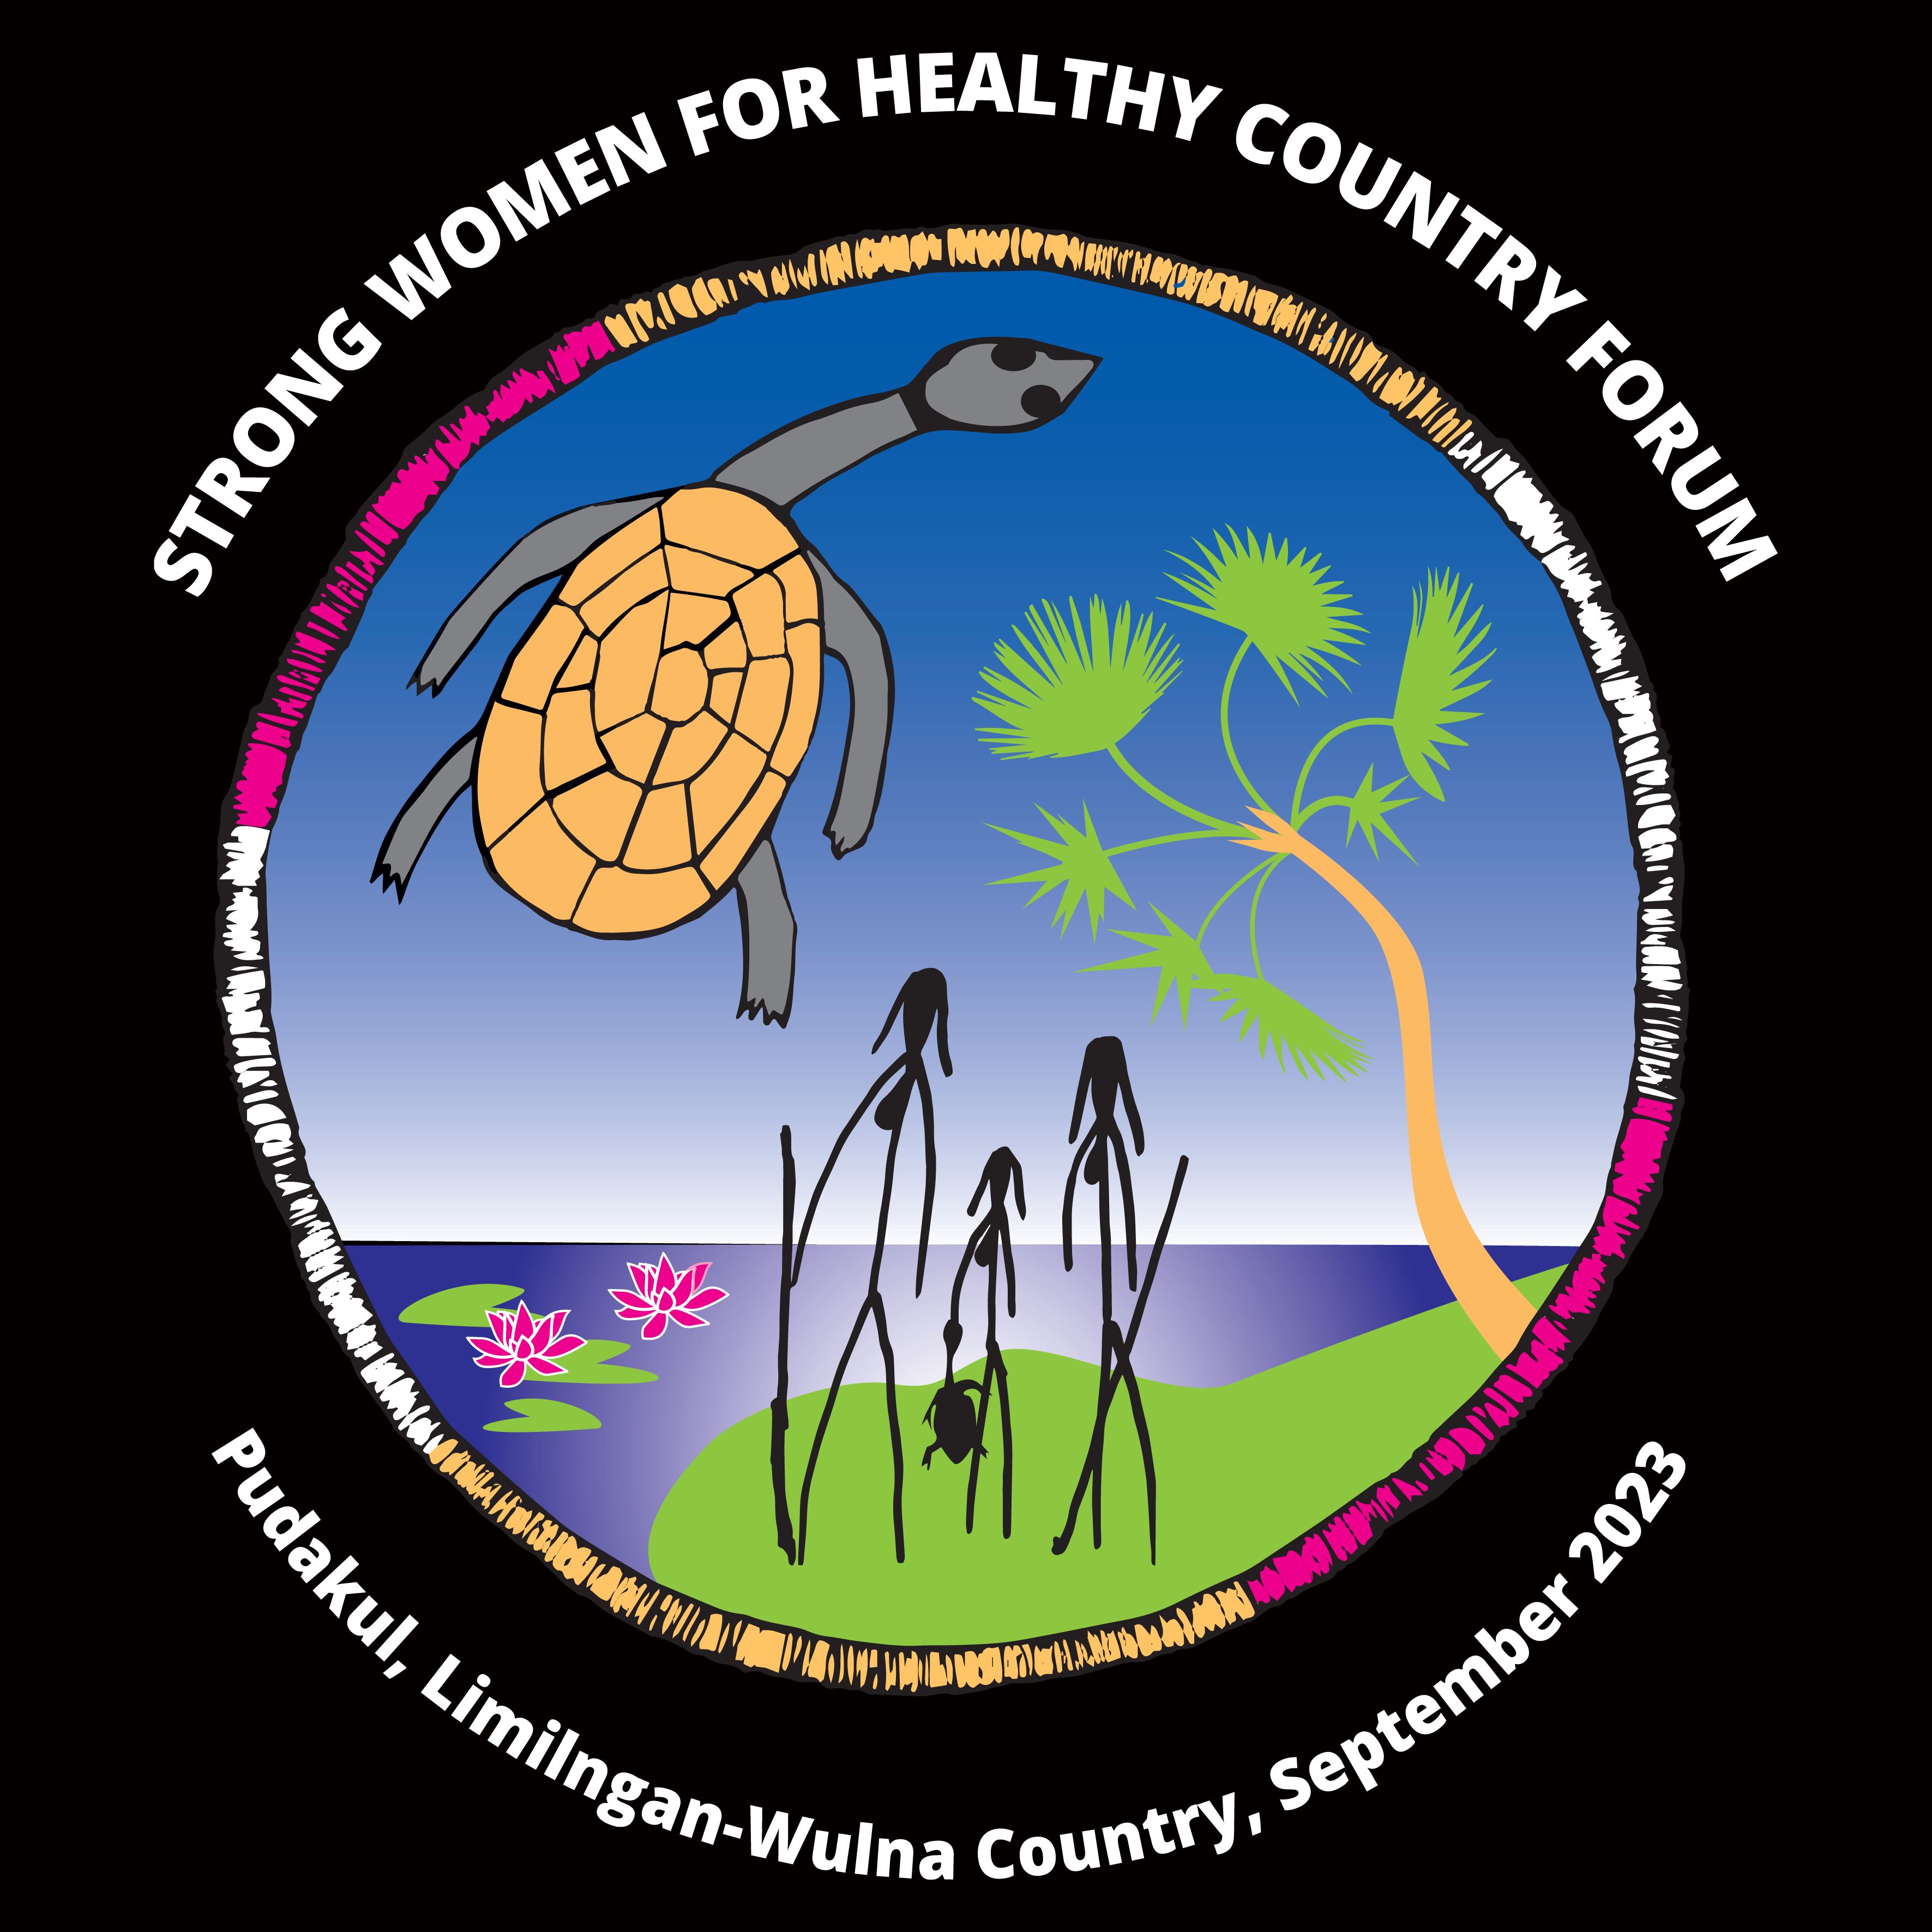 NRMjobs - 20020437 - Counsellor - Strong Women for Healthy Country (part-time)